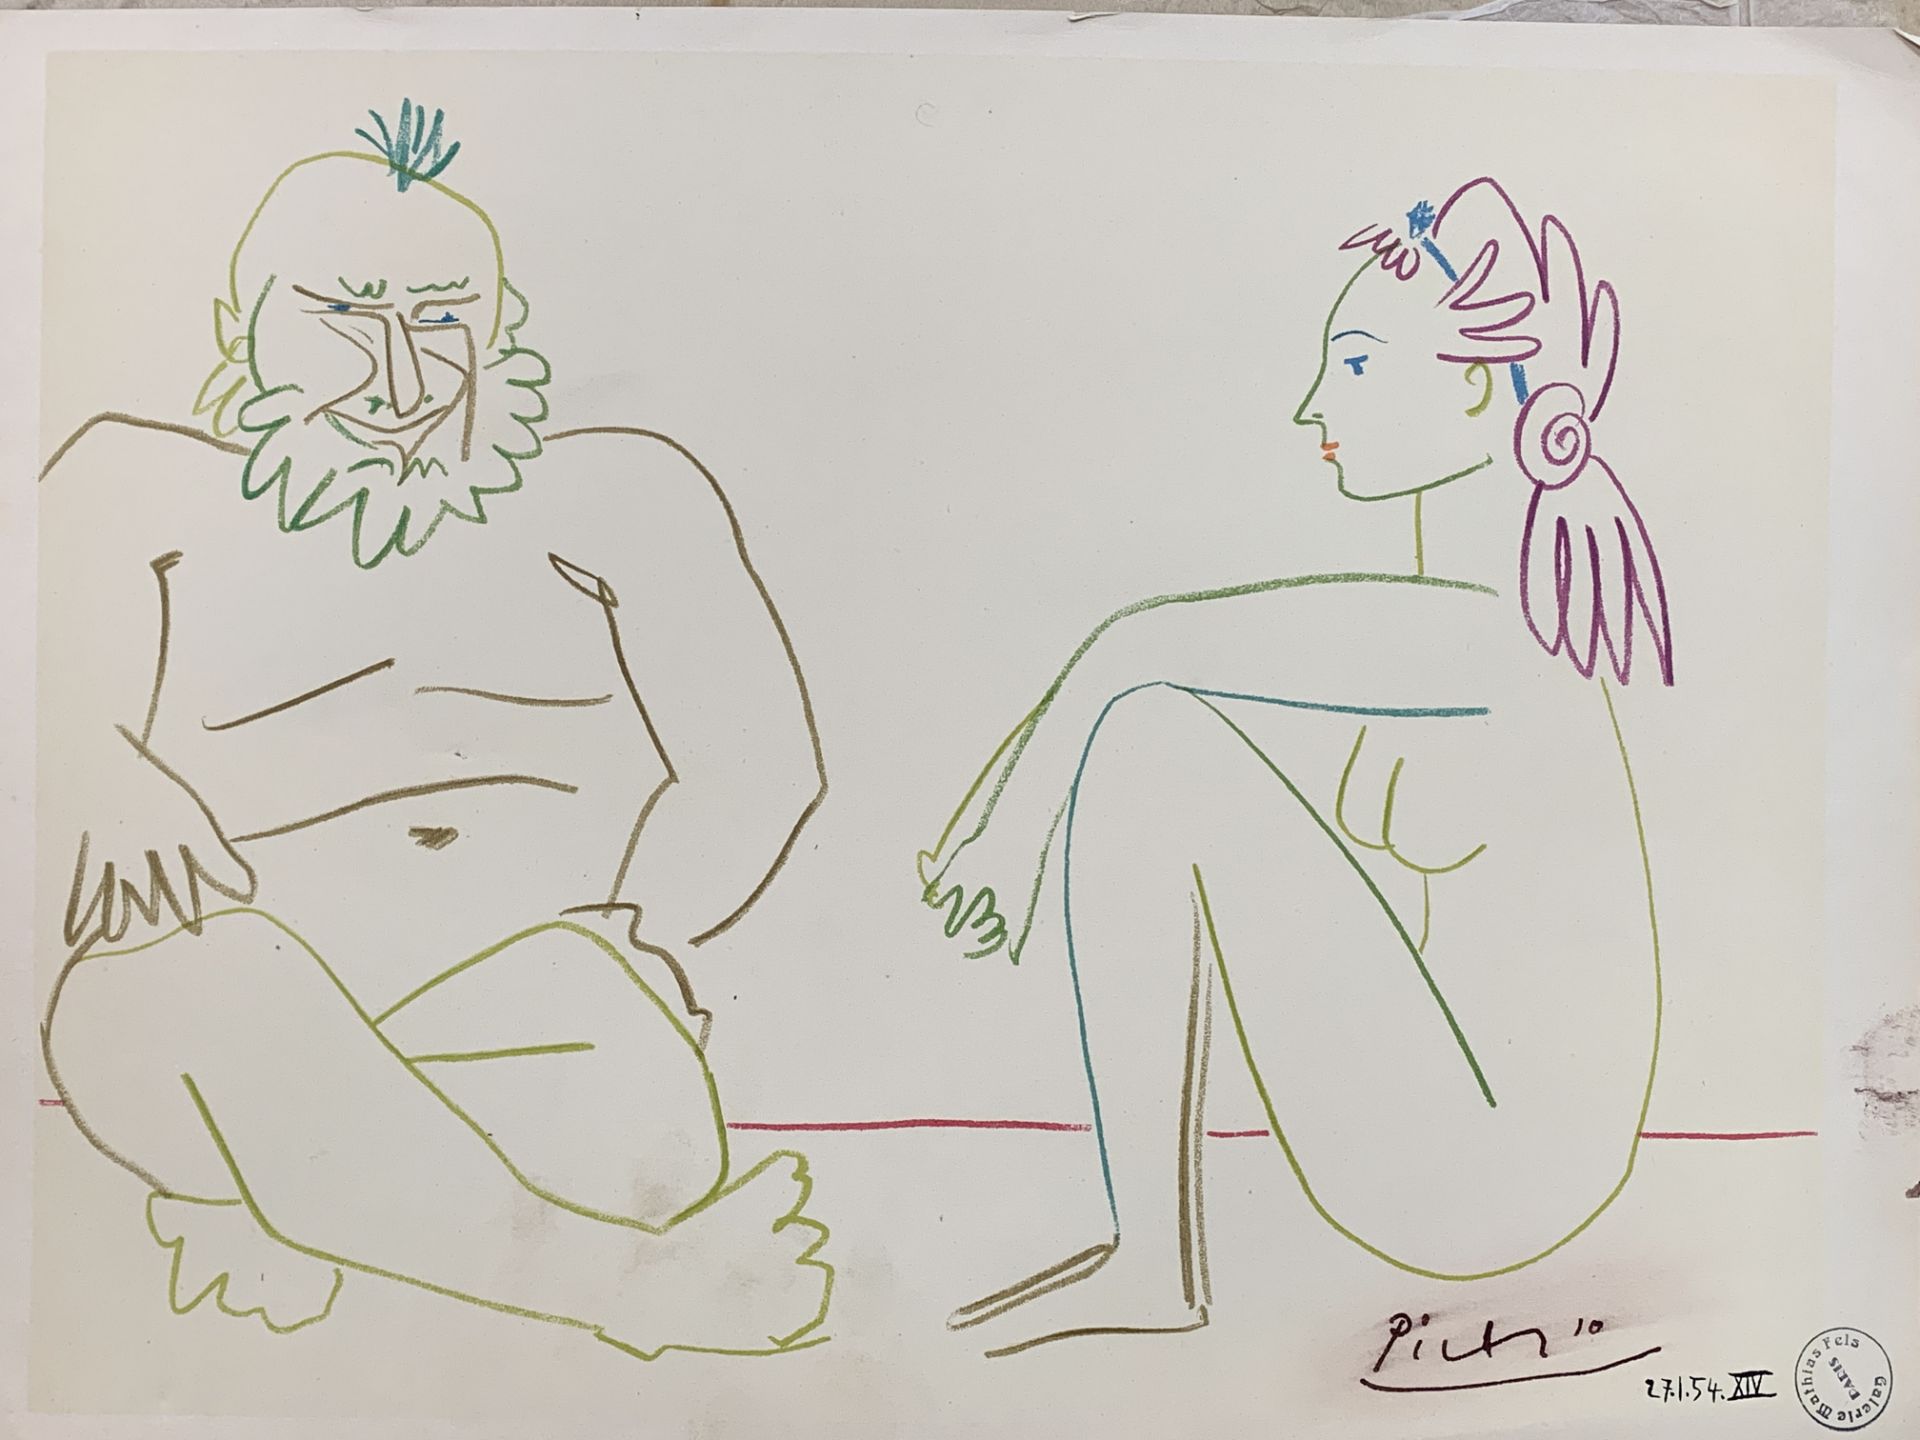 Unframed, hand signed and dated coloured lithograph by Pablo Picasso